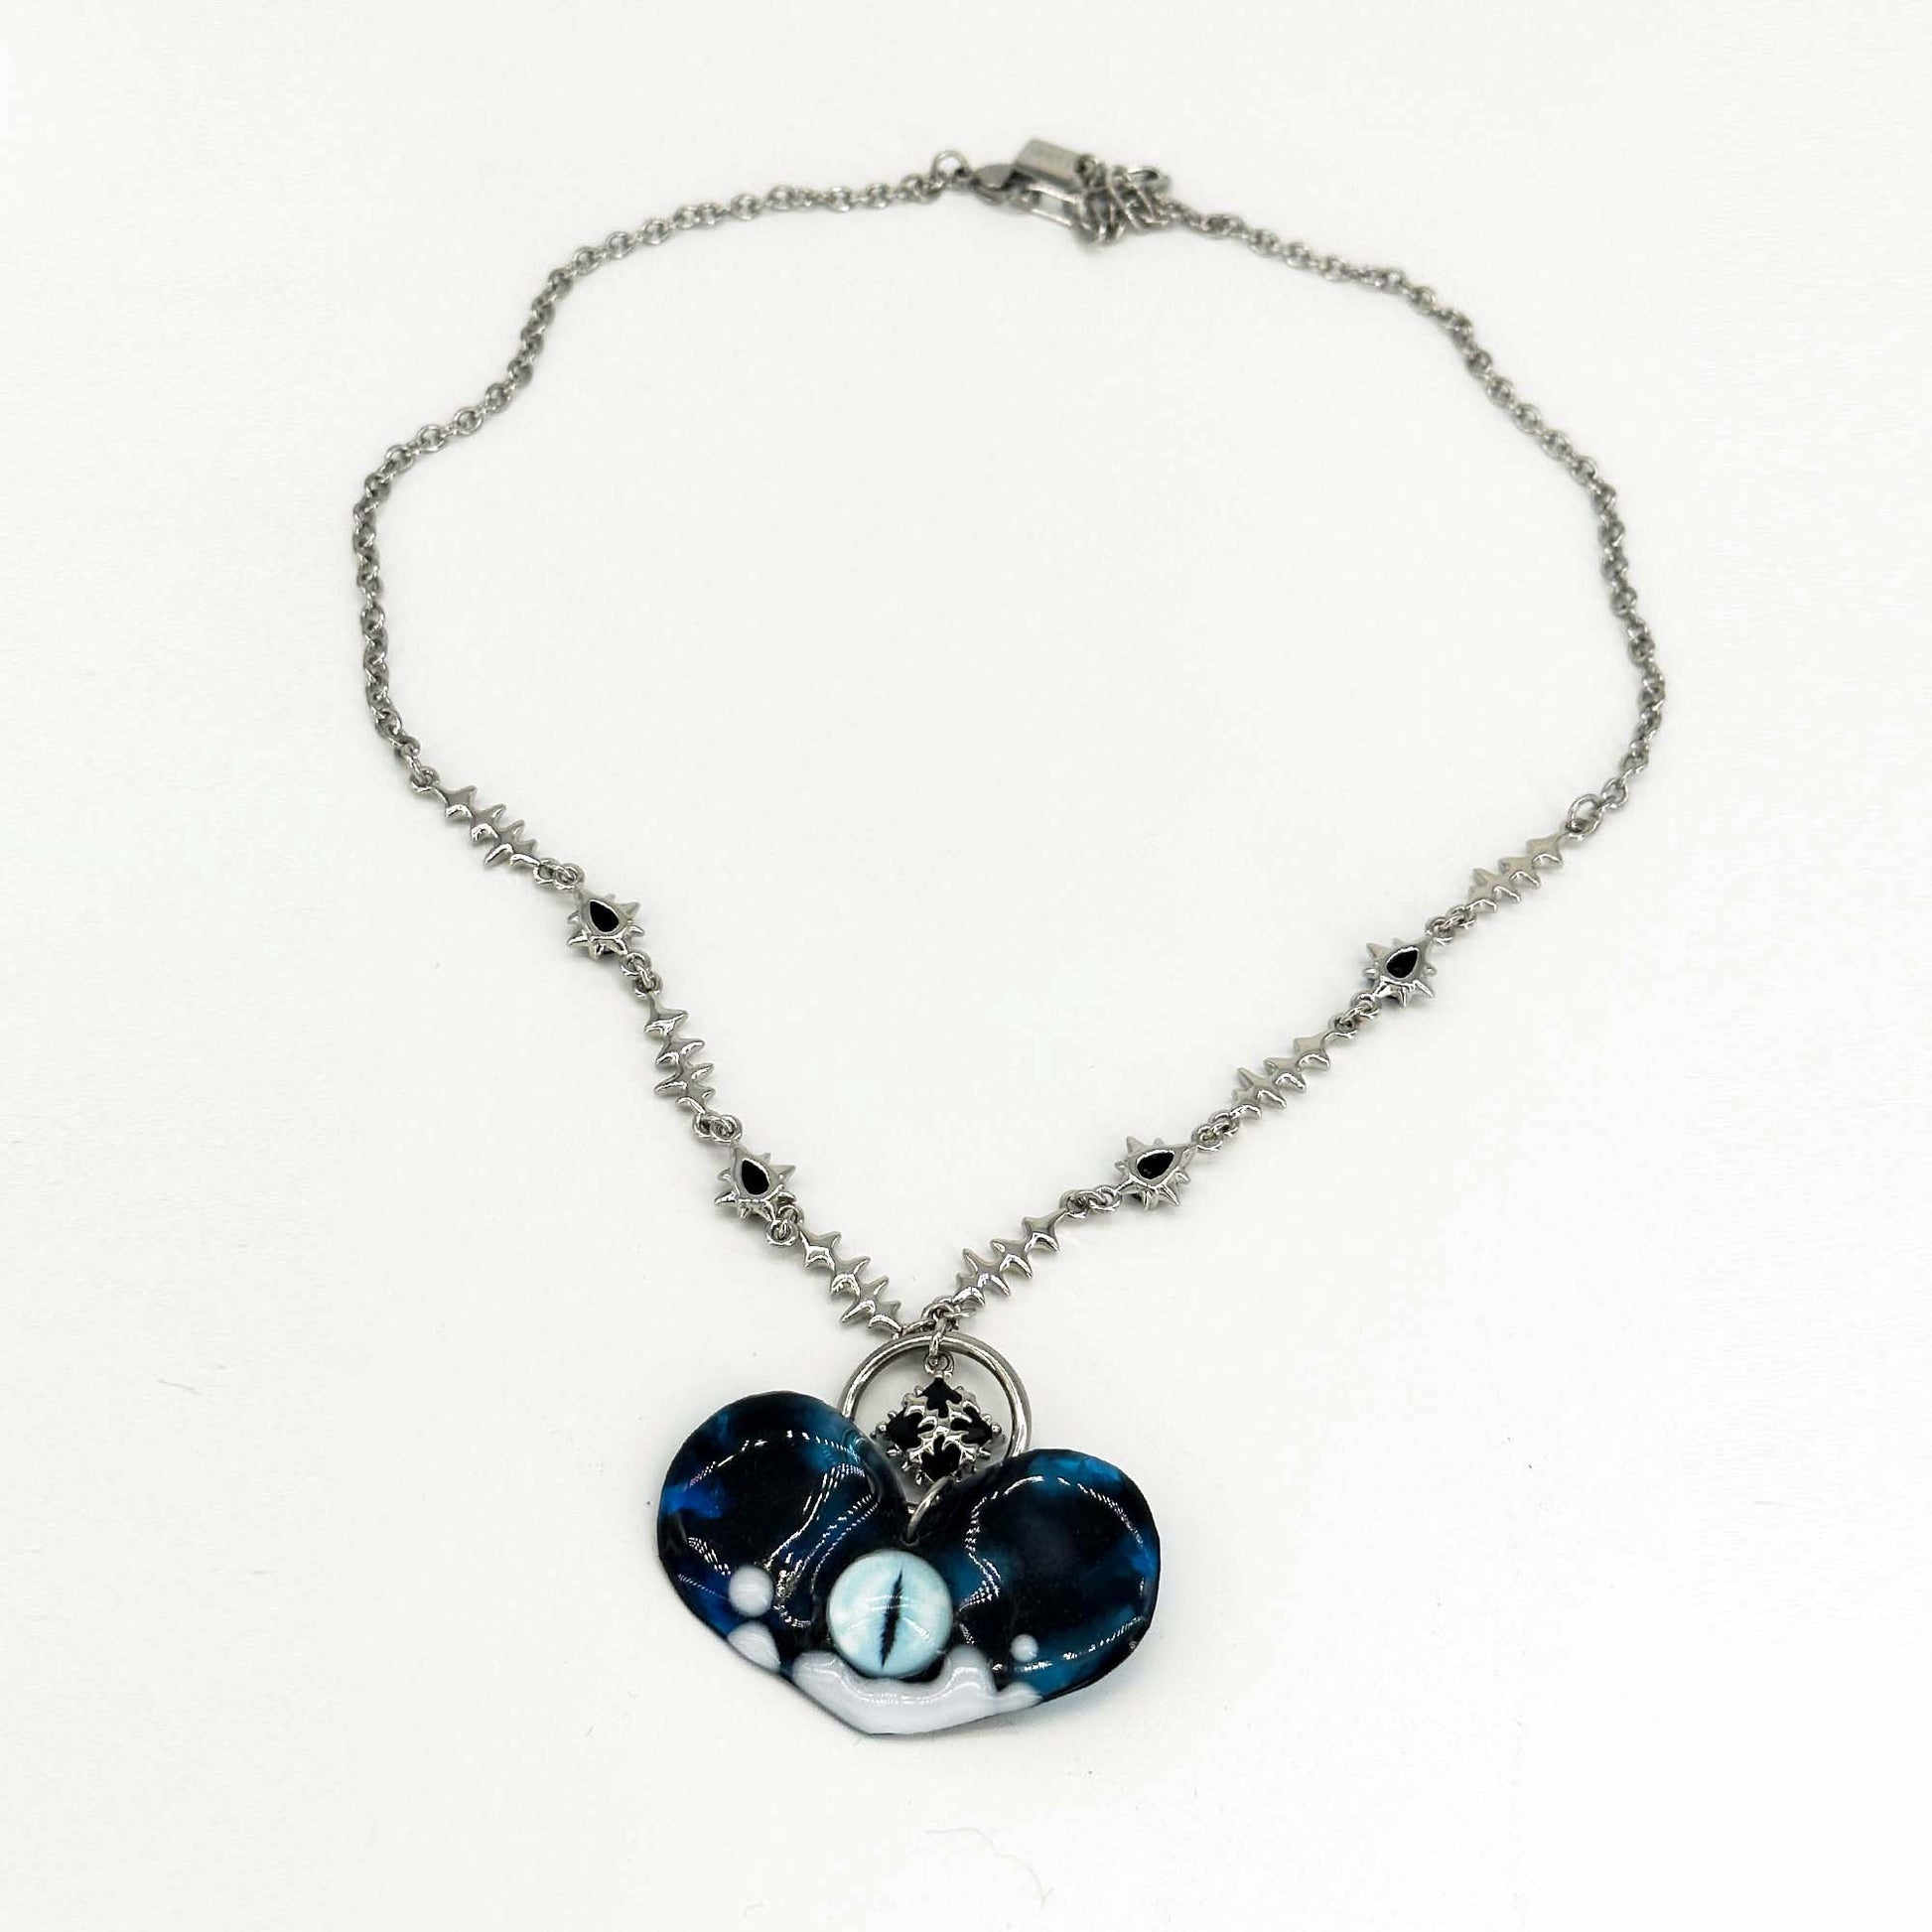 Handmade necklace made of resin in the shape of a heart and eye elements